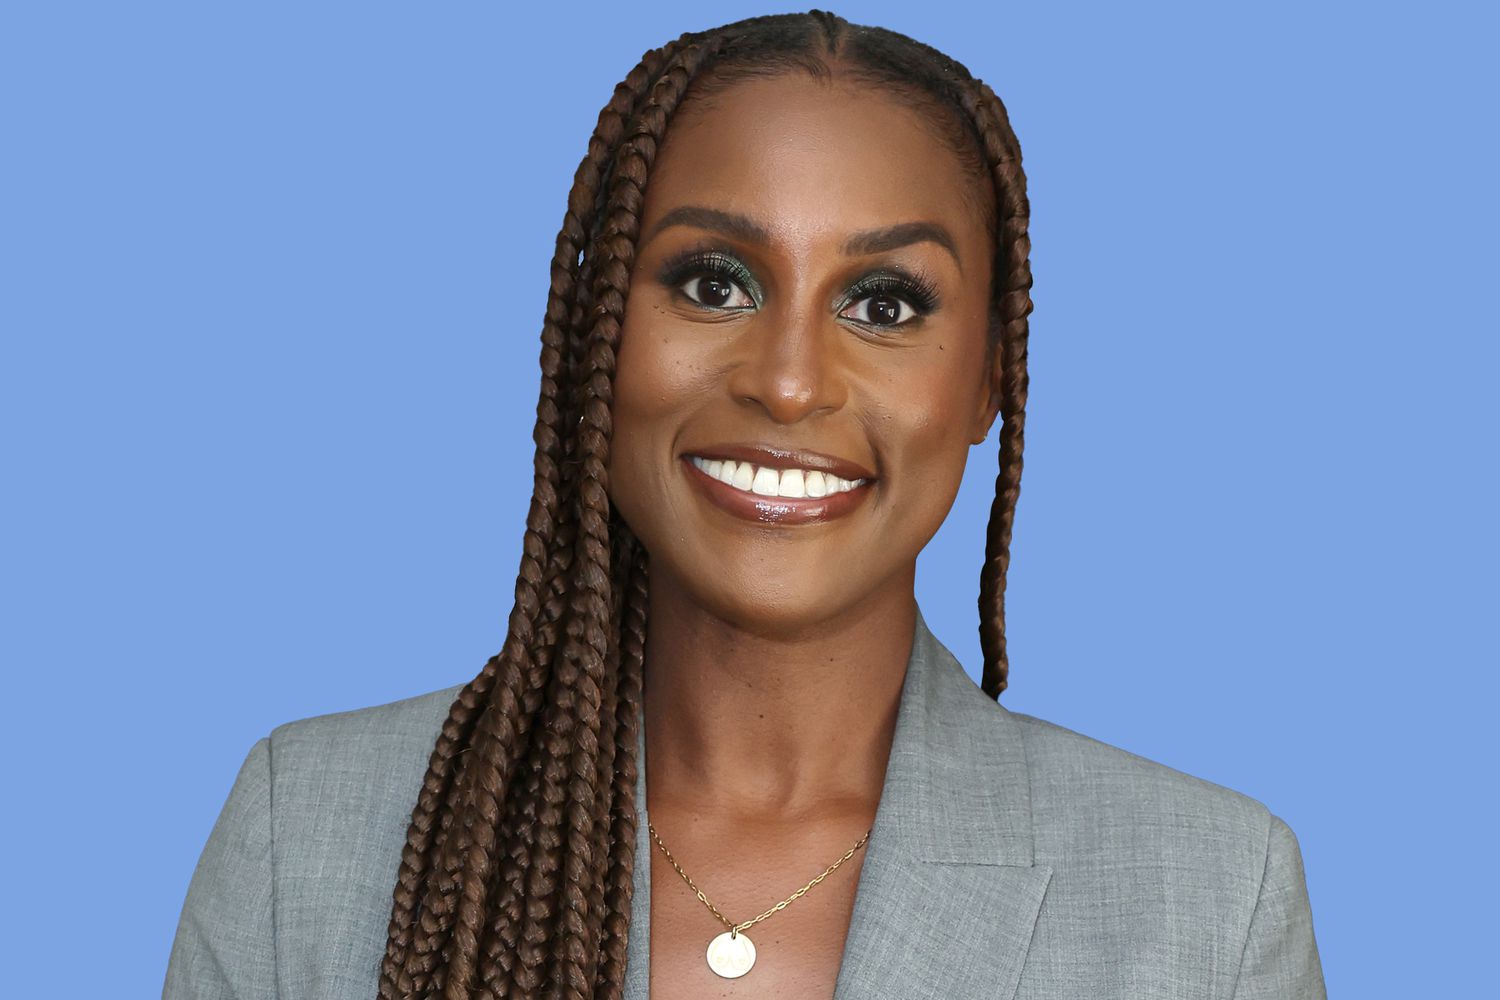 Issa Rae’s Name Botched During Interview, Audience Corrects Moderator